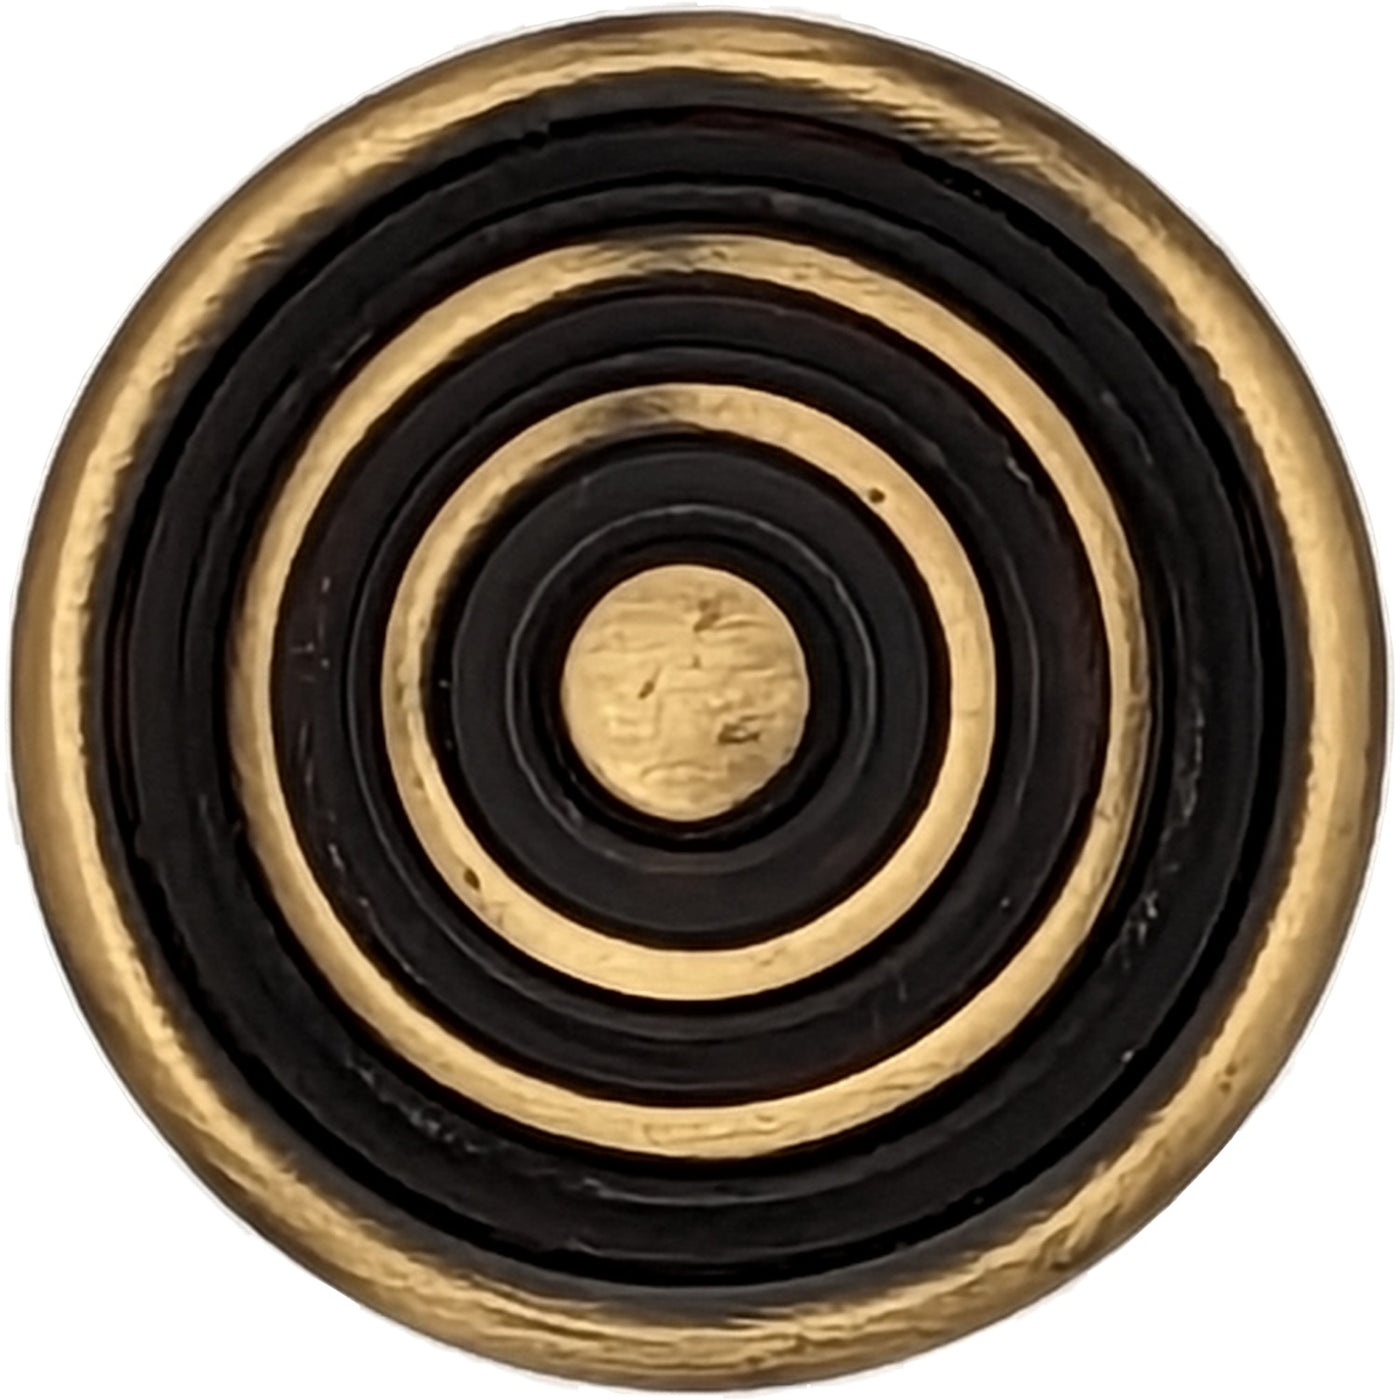 1 1/2 Inch Concentric Circle Cabinet Knob (Several Finishes Available)